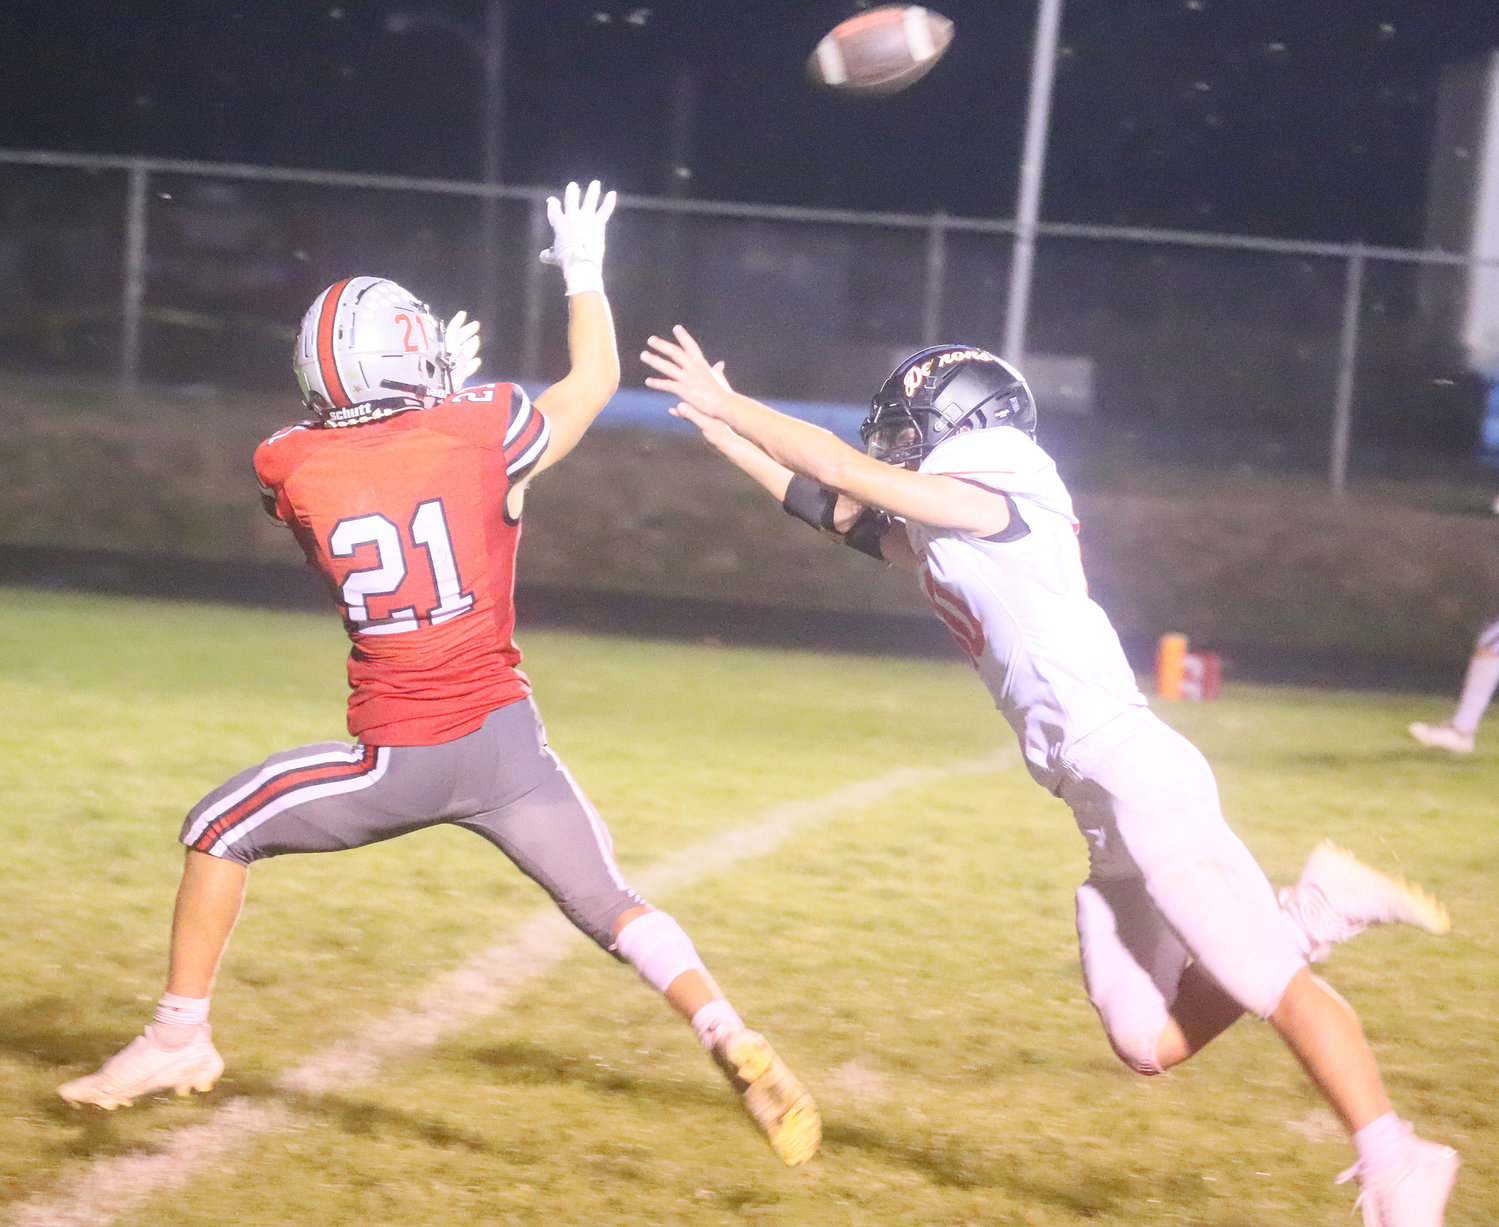 Senior Kane Williams hauls in an 18-yard TD pass in the third quarter to put Fort Madison up 30-0 Friday night in Fort Madison.